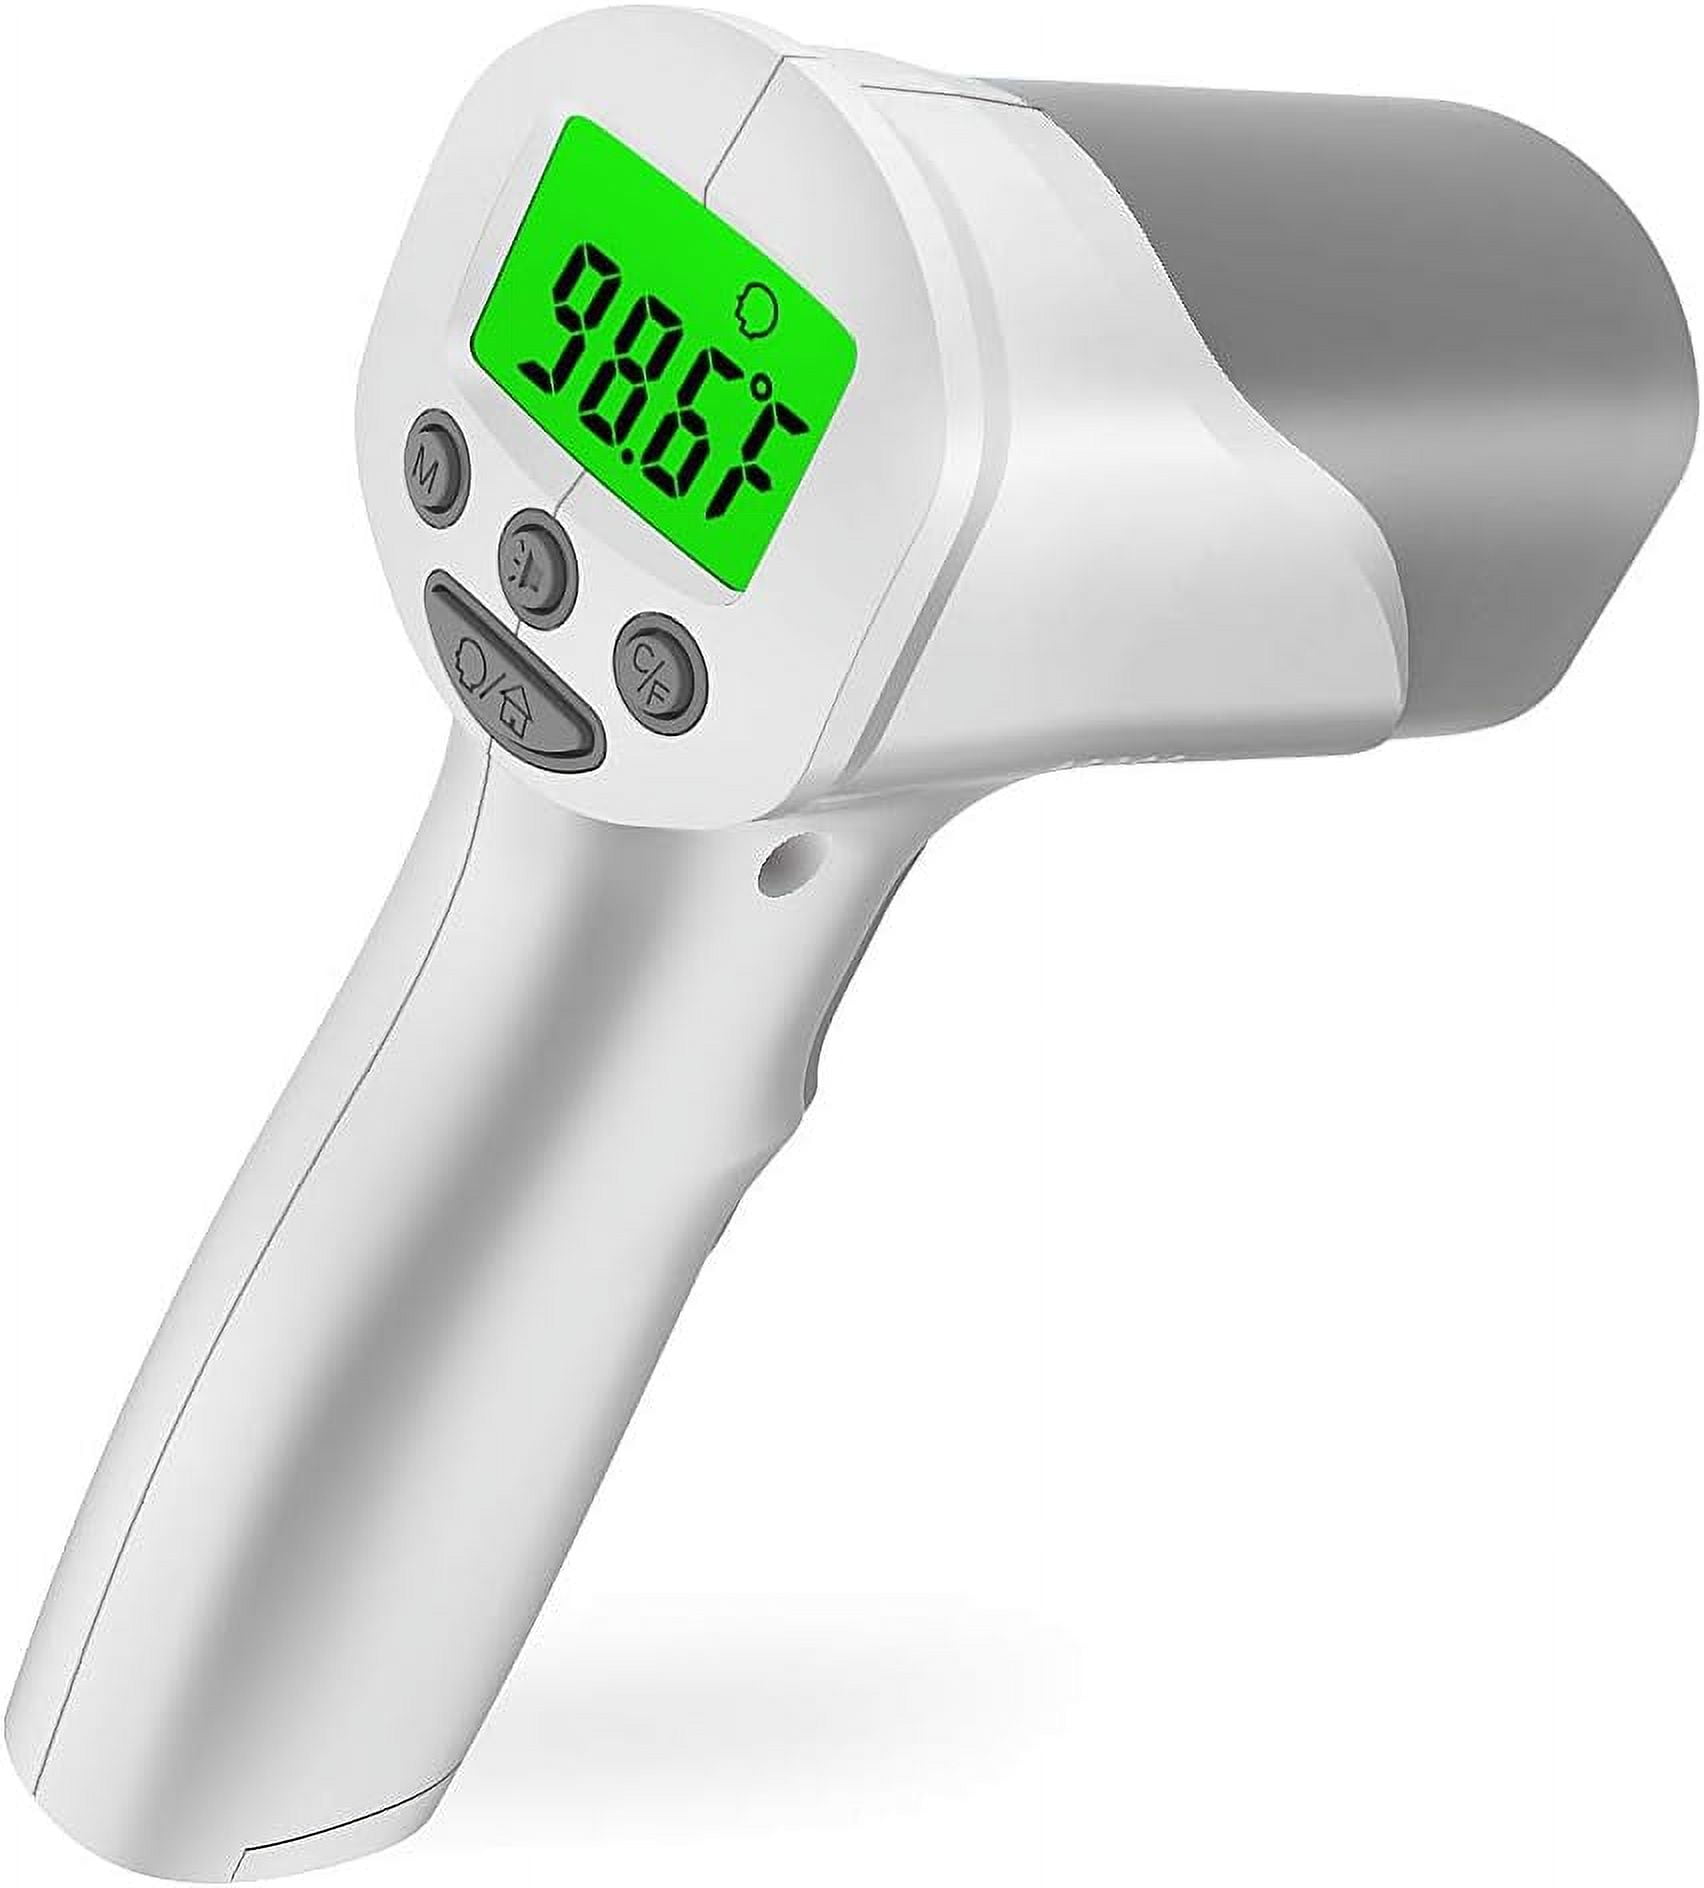 Smart Forehead & Ear Infrared Thermometer. FDA Approved. Bluetooth